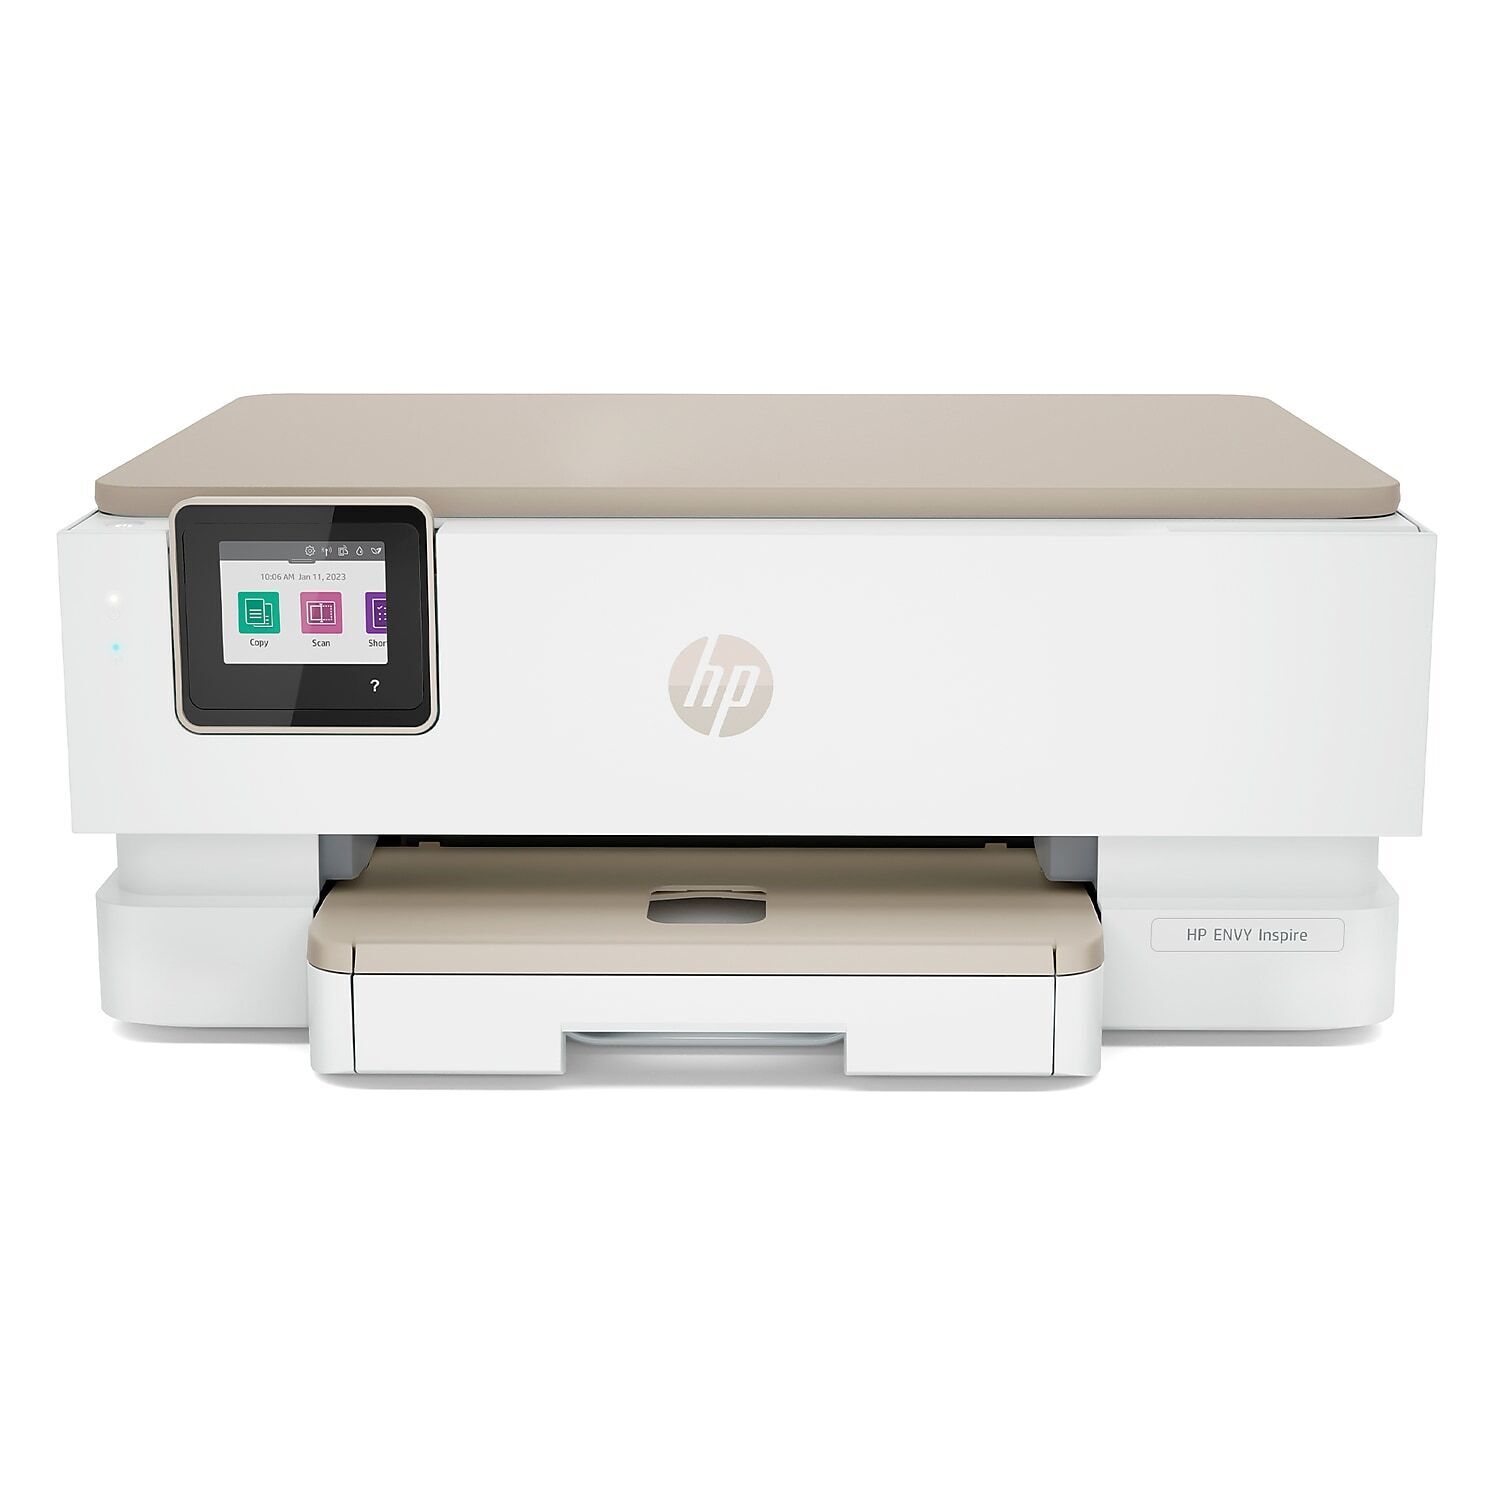 HP ENVY Inspire 7255e Wireless All-in-One Color Photo Printer Scan Copy Best for